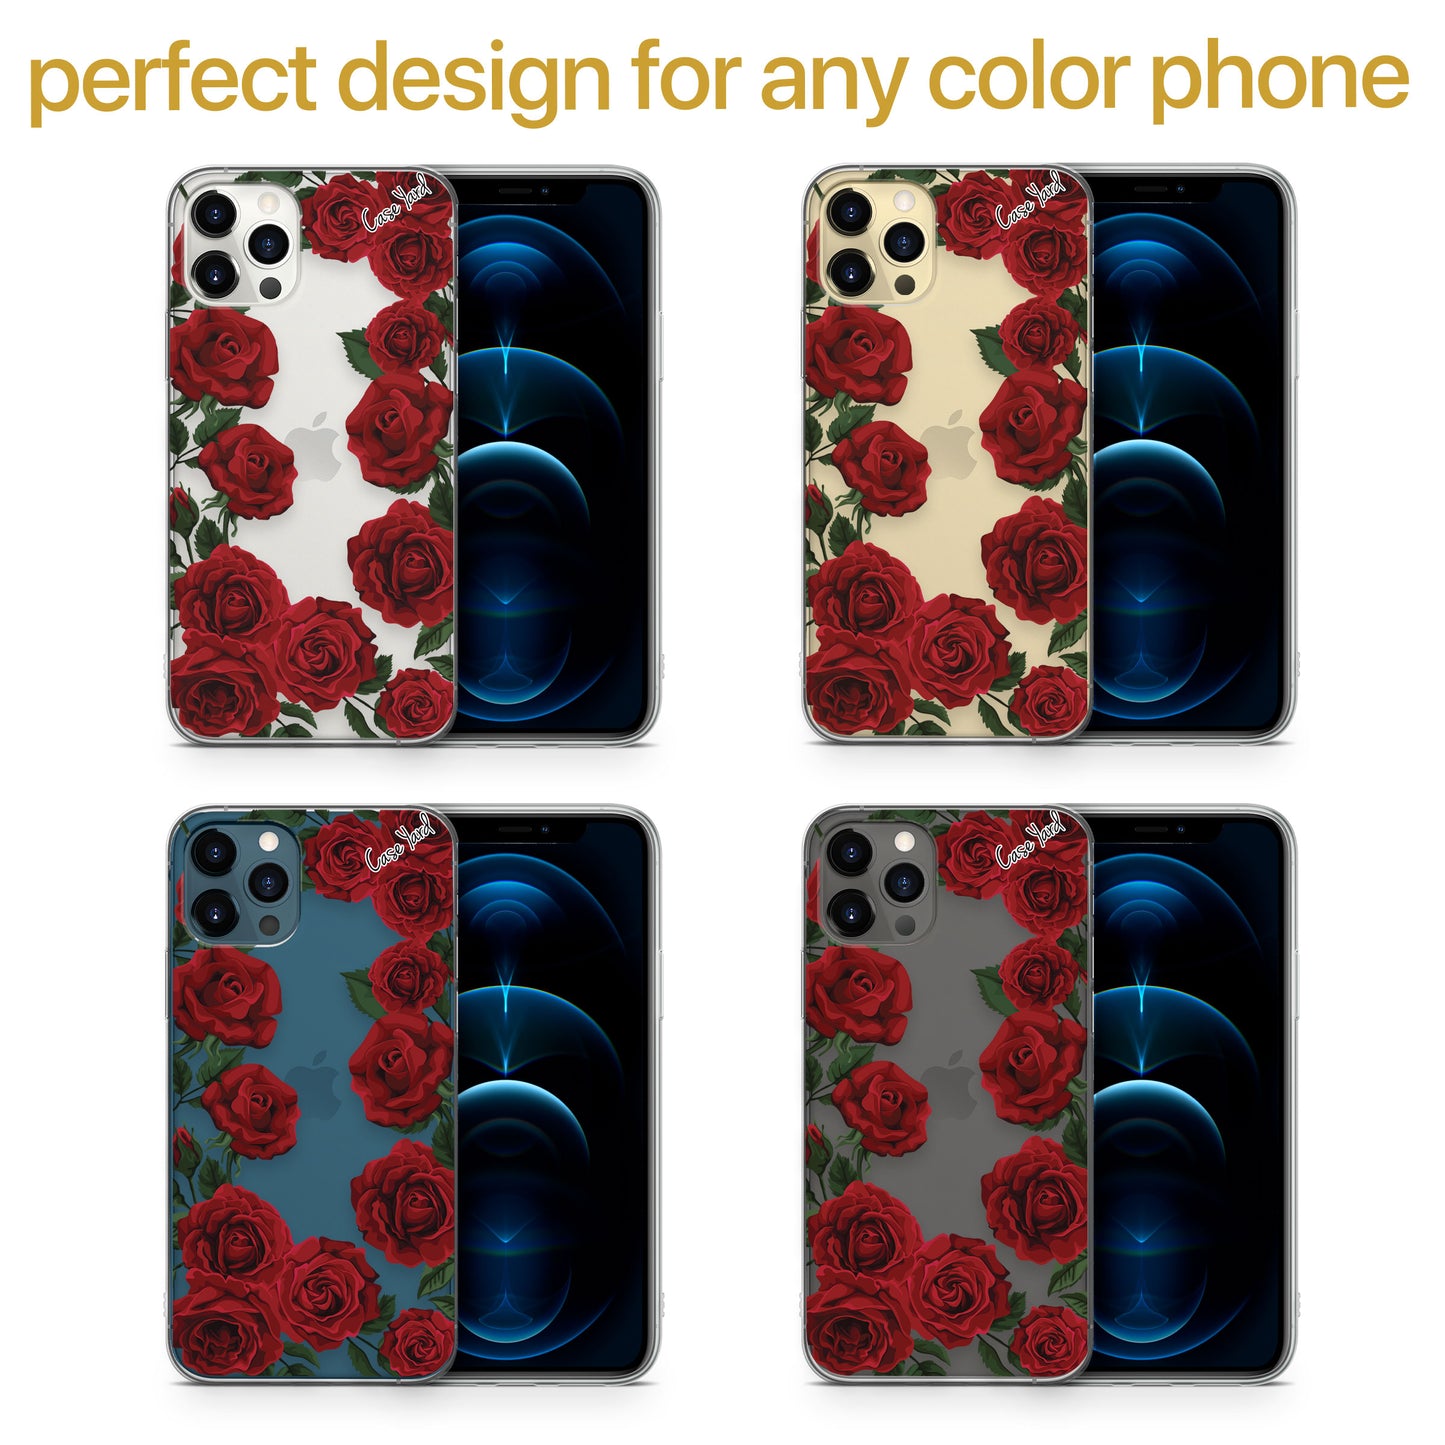 TPU Clear case with (Red Roses) Design for iPhone & Samsung Phones